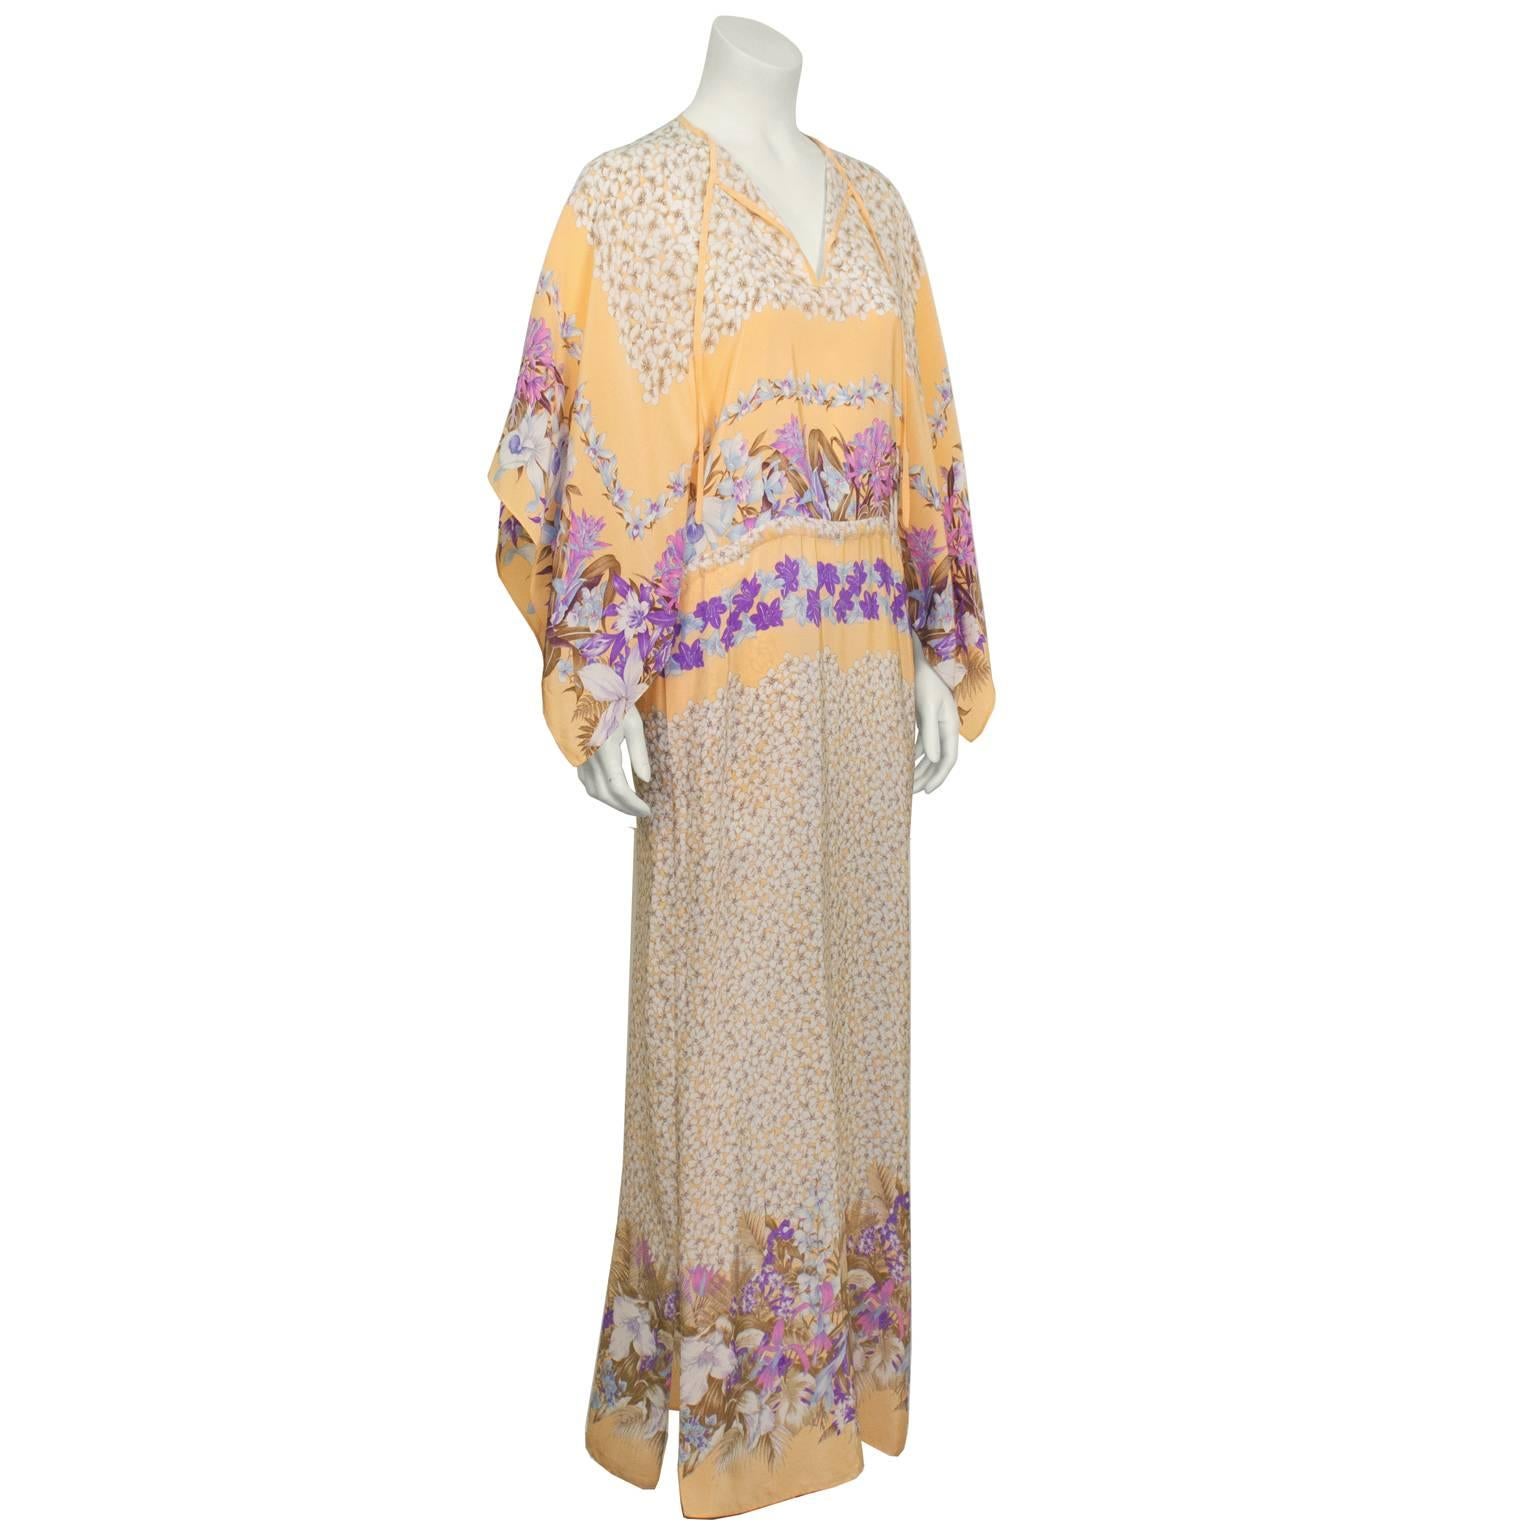 1970’s Marina Ferrari peach floral silk kaftan. The kaftan has a tie-up keyhole neckline, 3/4 length kimono sleeves and a drawstring waist that ties at the side.  The allover floral pattern features cream pansies at the neckline and on the skirt and